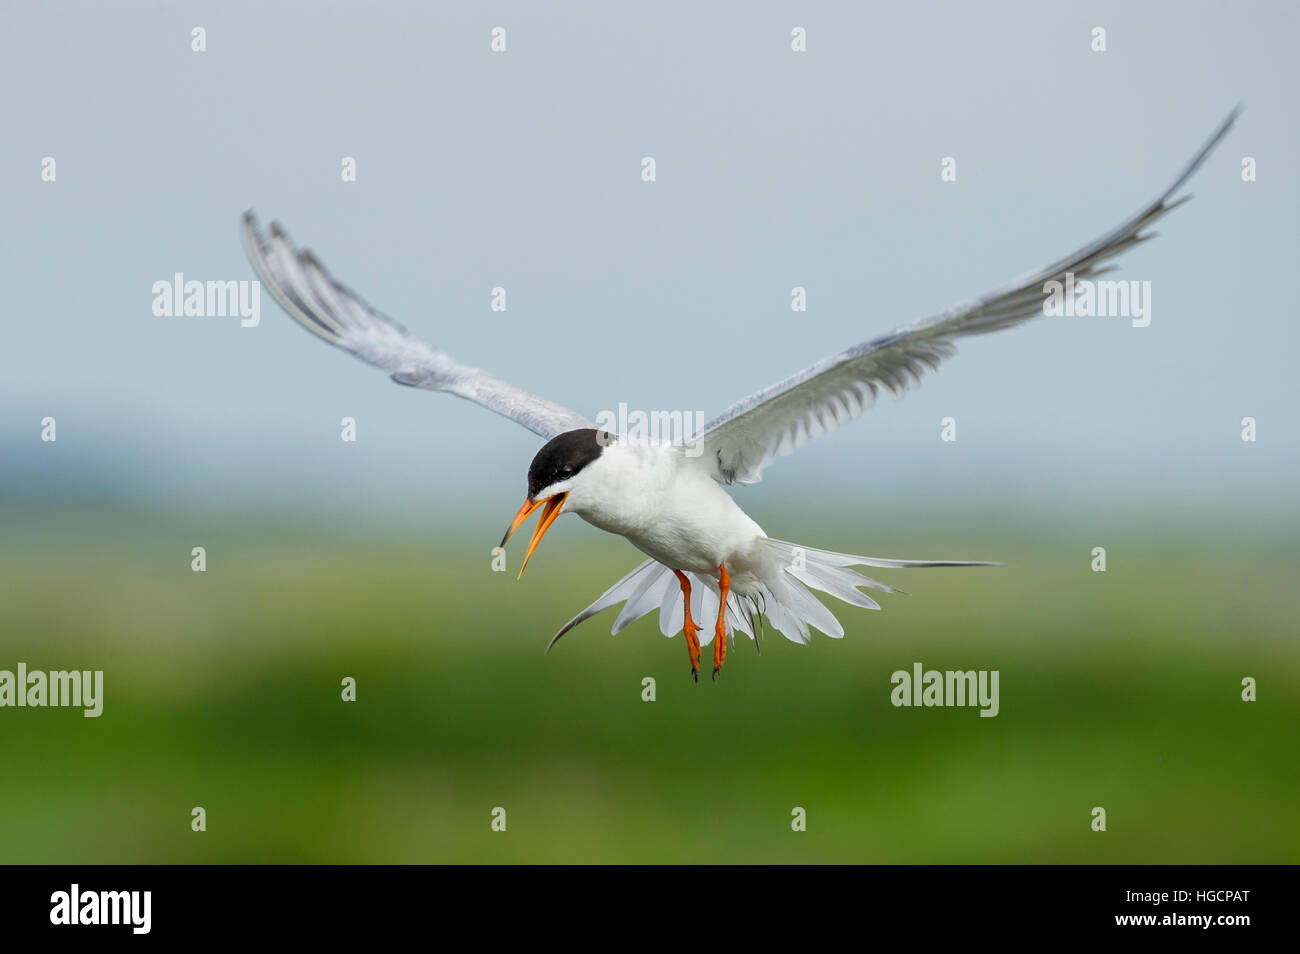 A Forsters Tern hovers in the air while it calls loudly in search of small fish in the water below. Stock Photo